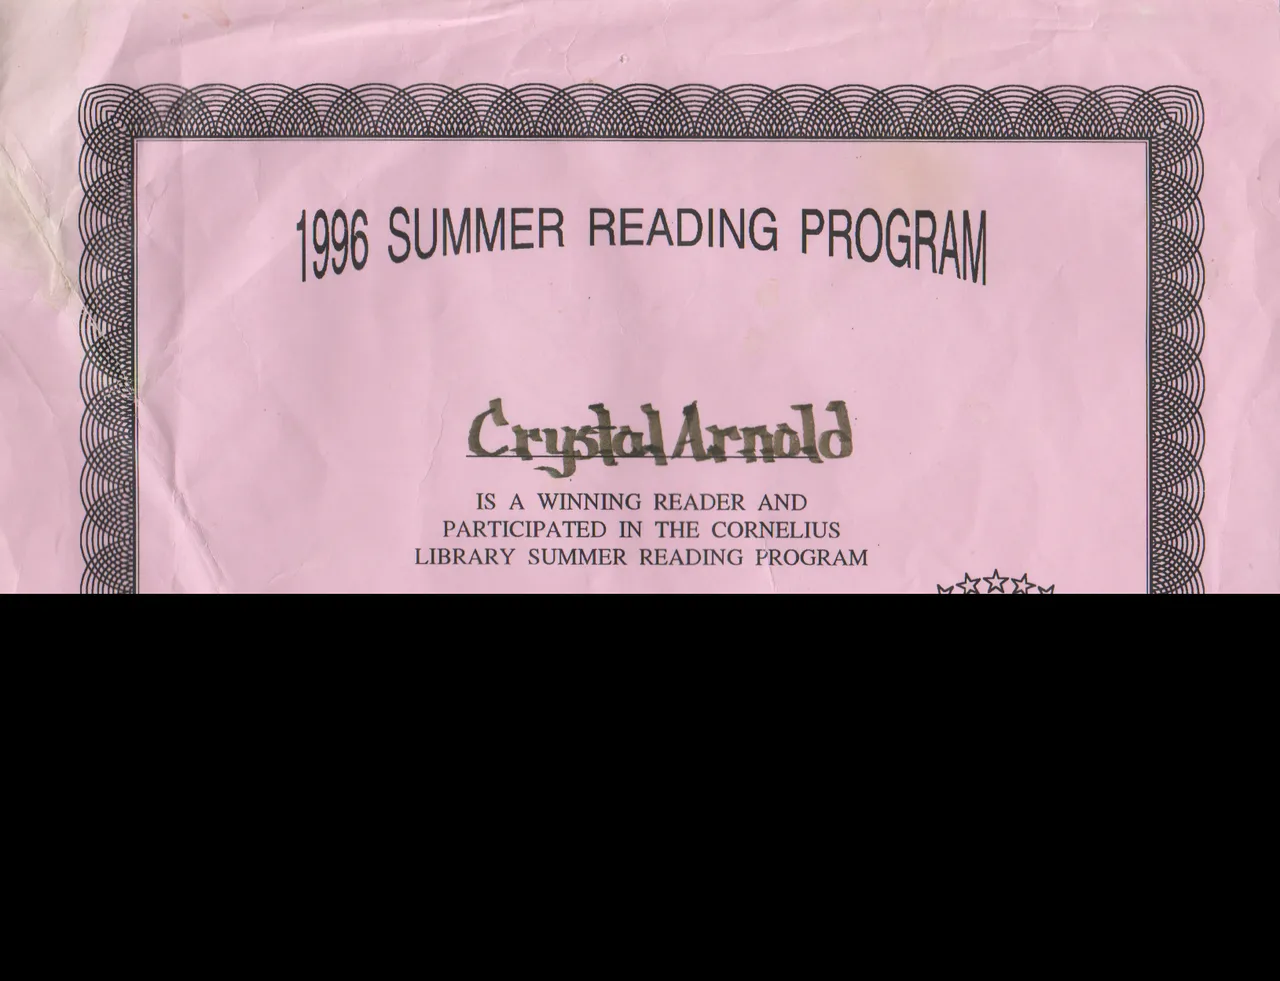 1996-08-10 - Saturday - Crystal Arnold, Summer Reading Program, Winning Reader, Participant, Certificate.png